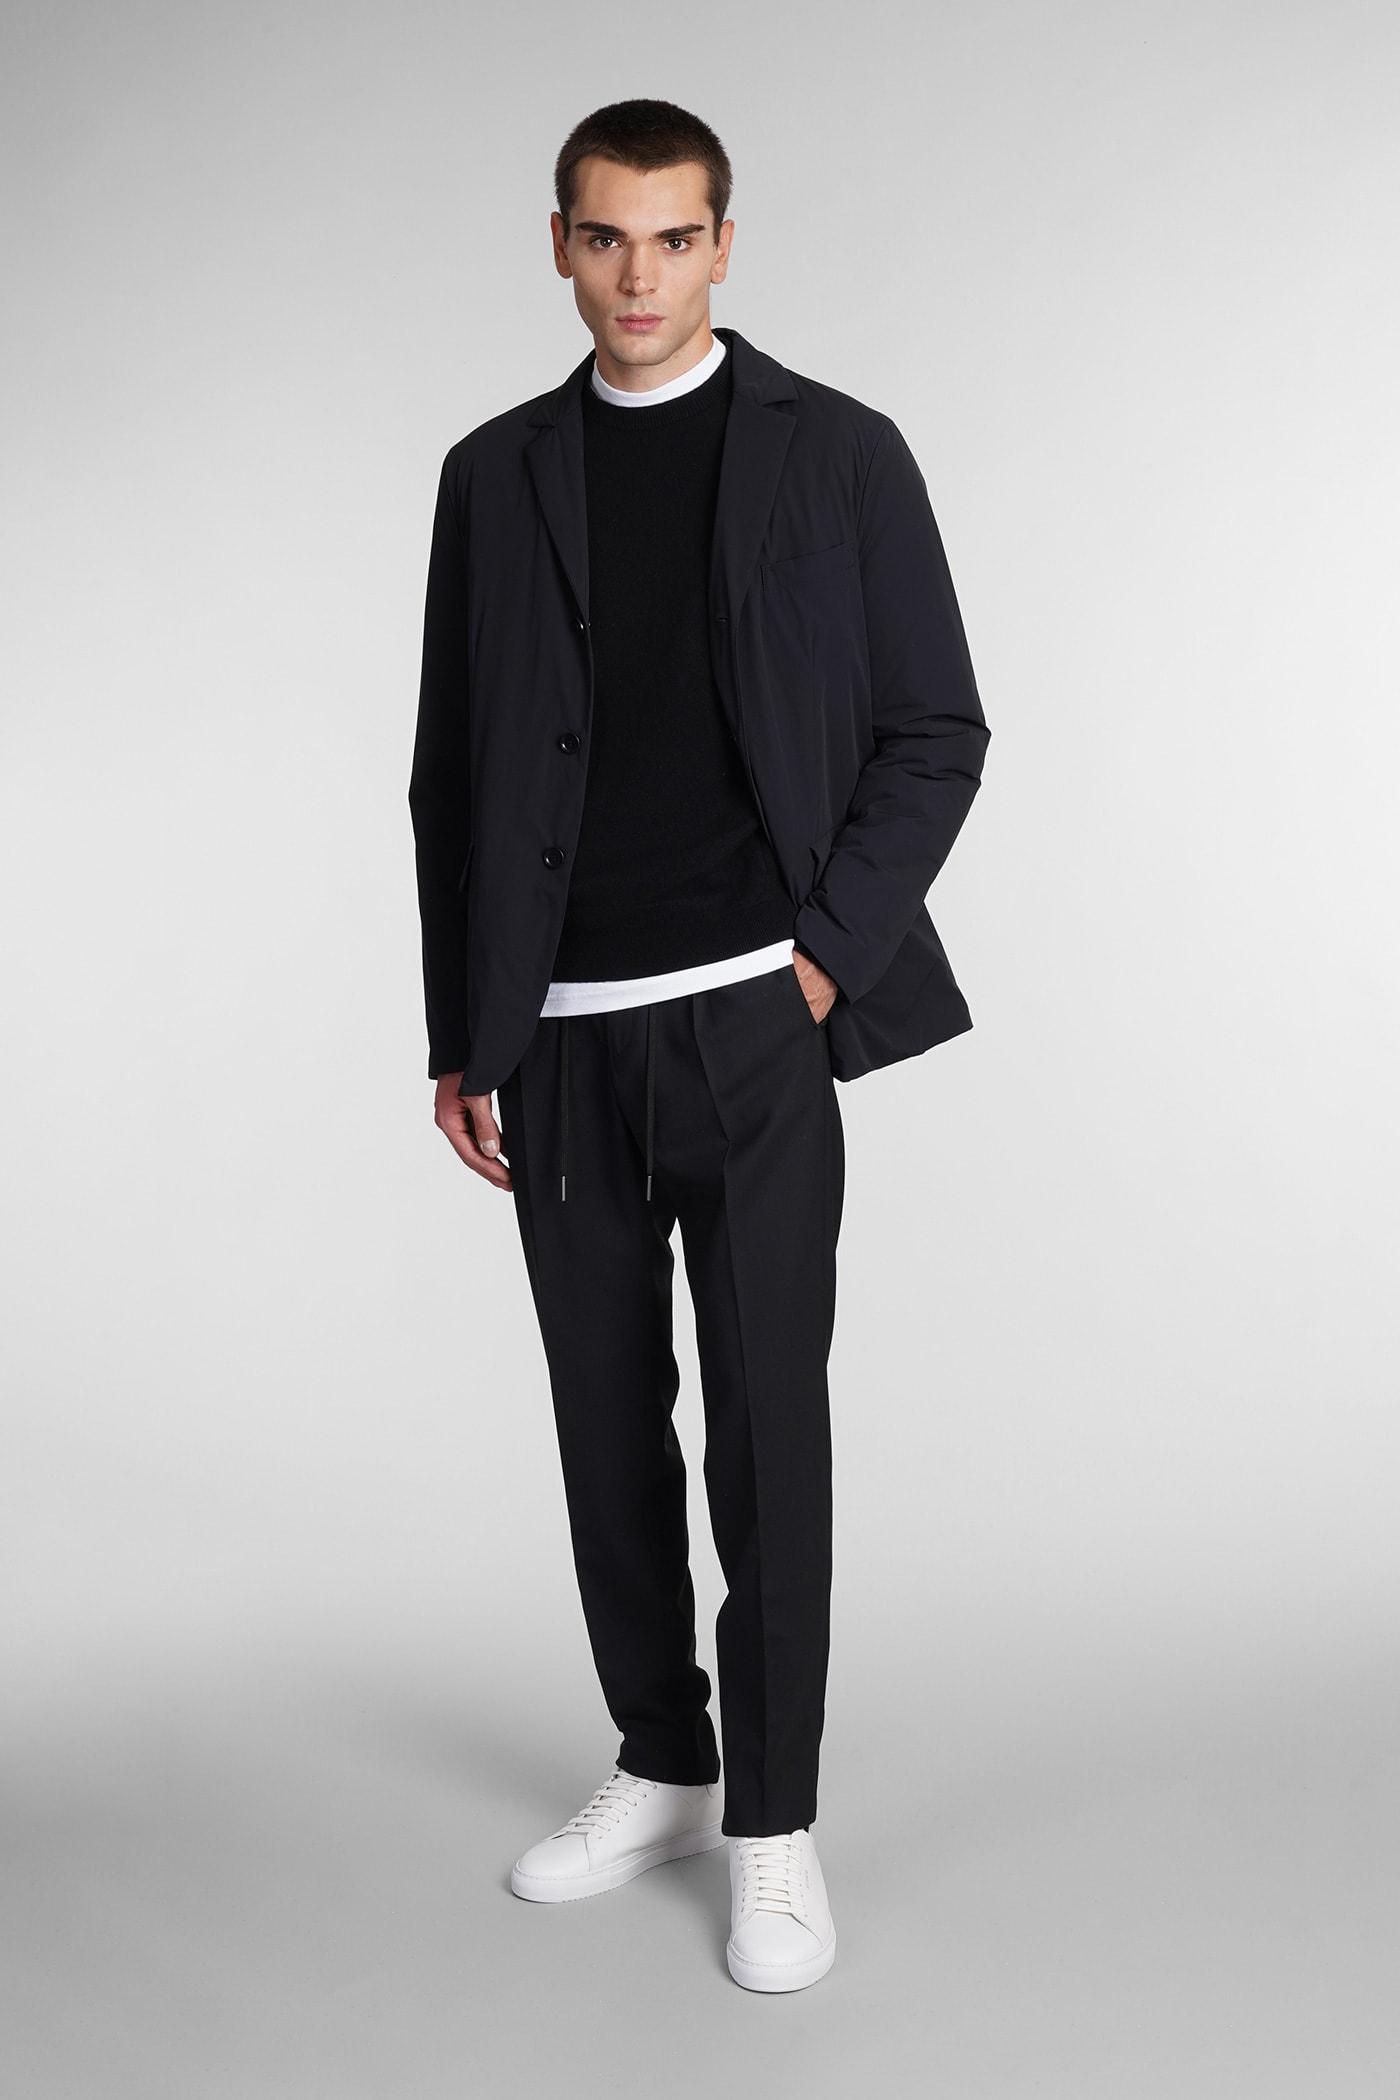 Tagliatore 0205 Pants In Black Polyester for Men | Lyst